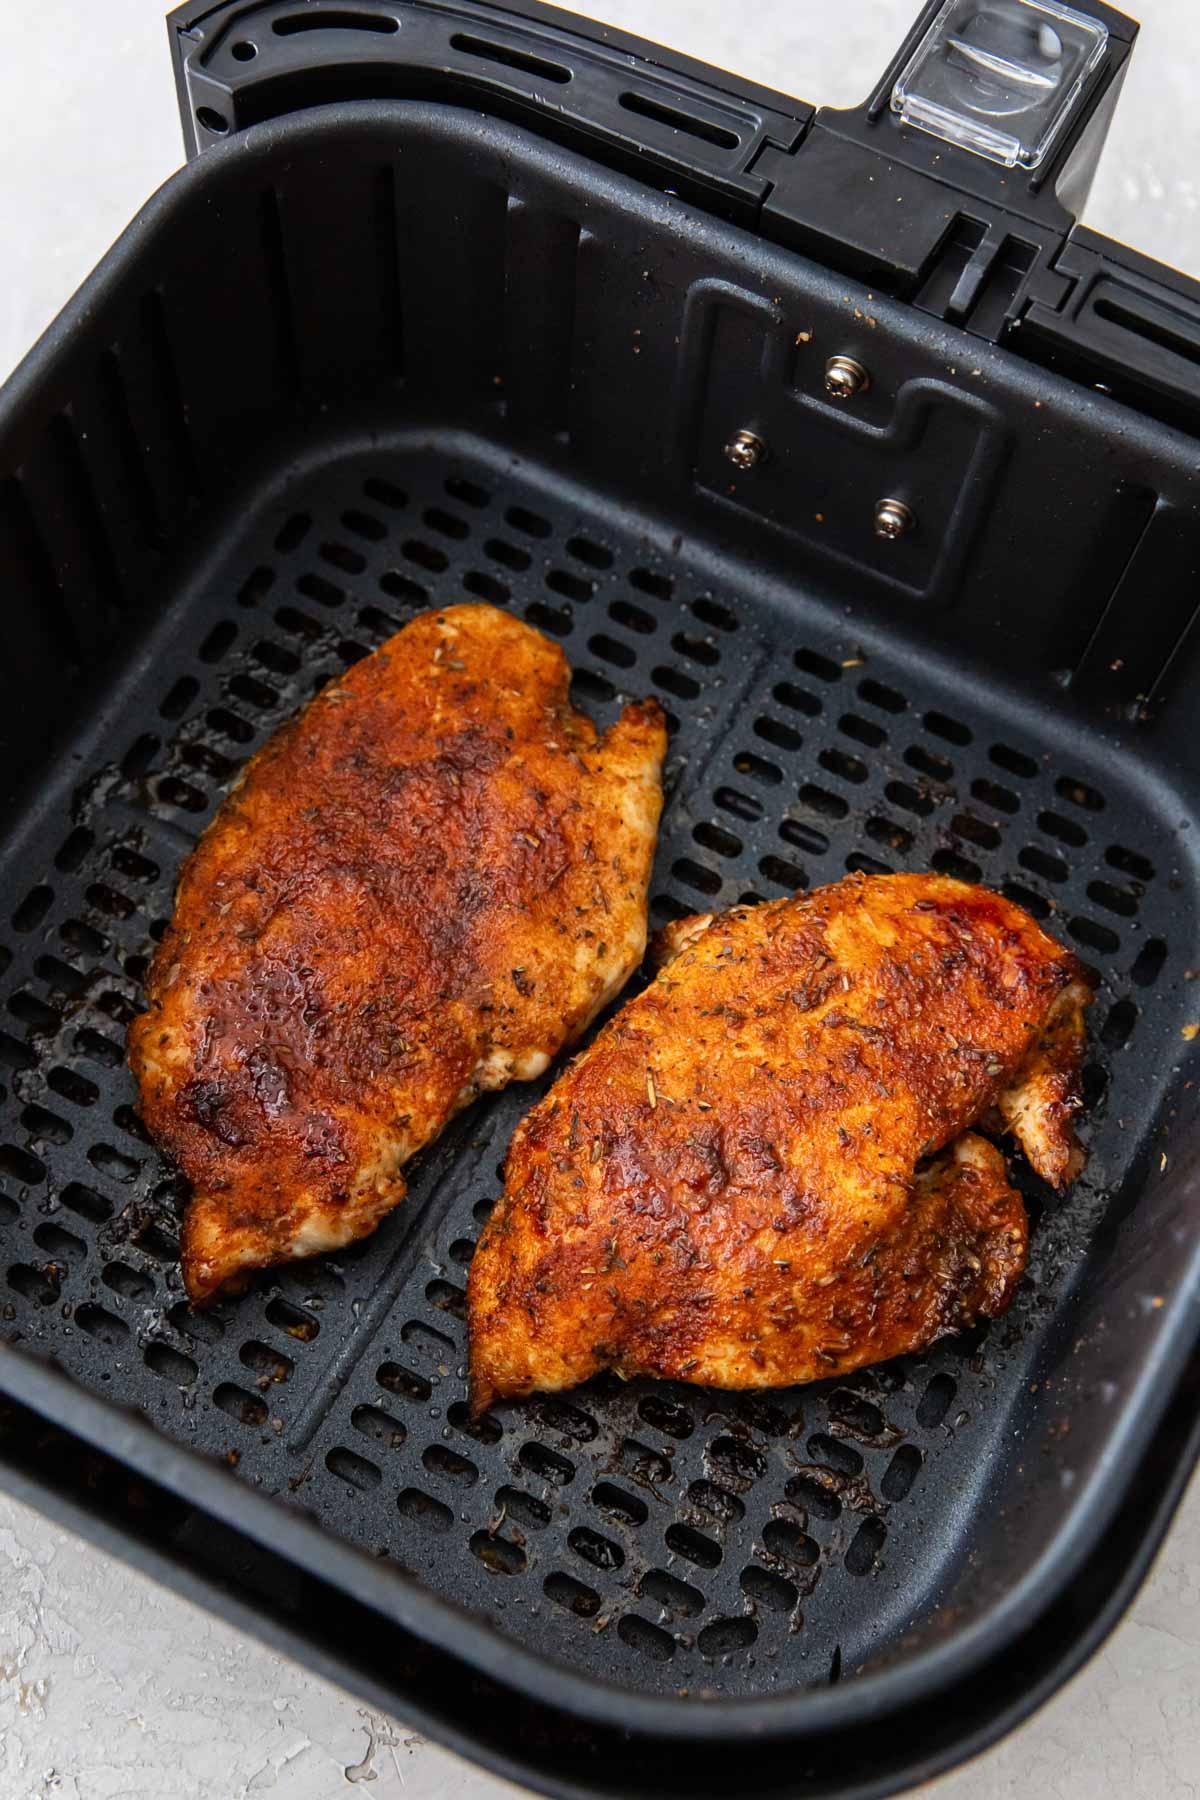 Two cooked chicken breasts in an air fryer